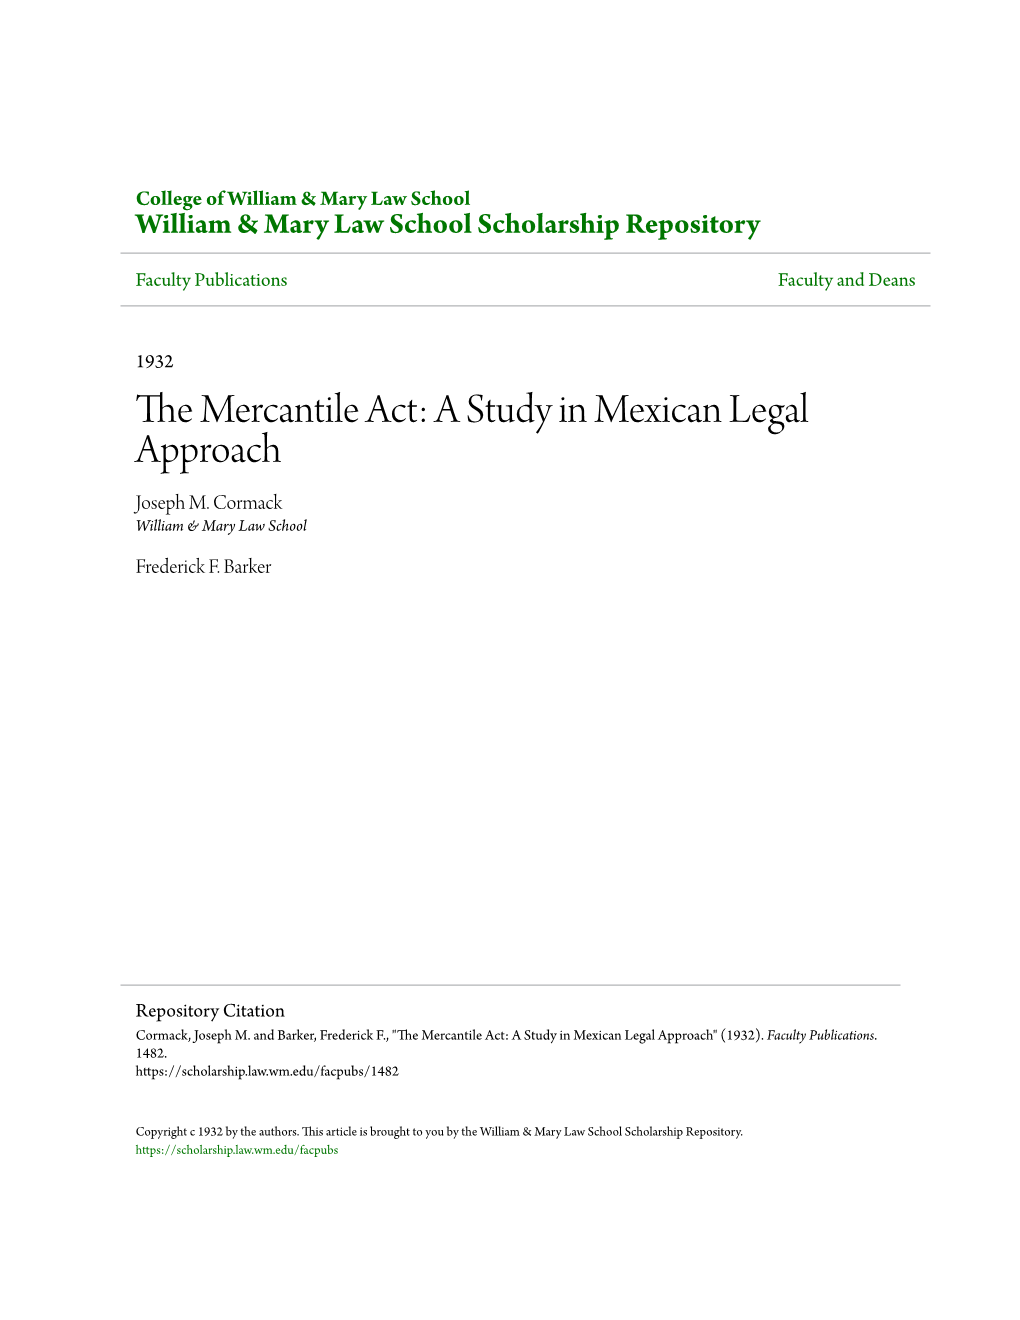 THE MERCANTILE ACT: a STUDY in MEXICAN LEGAL Approacht